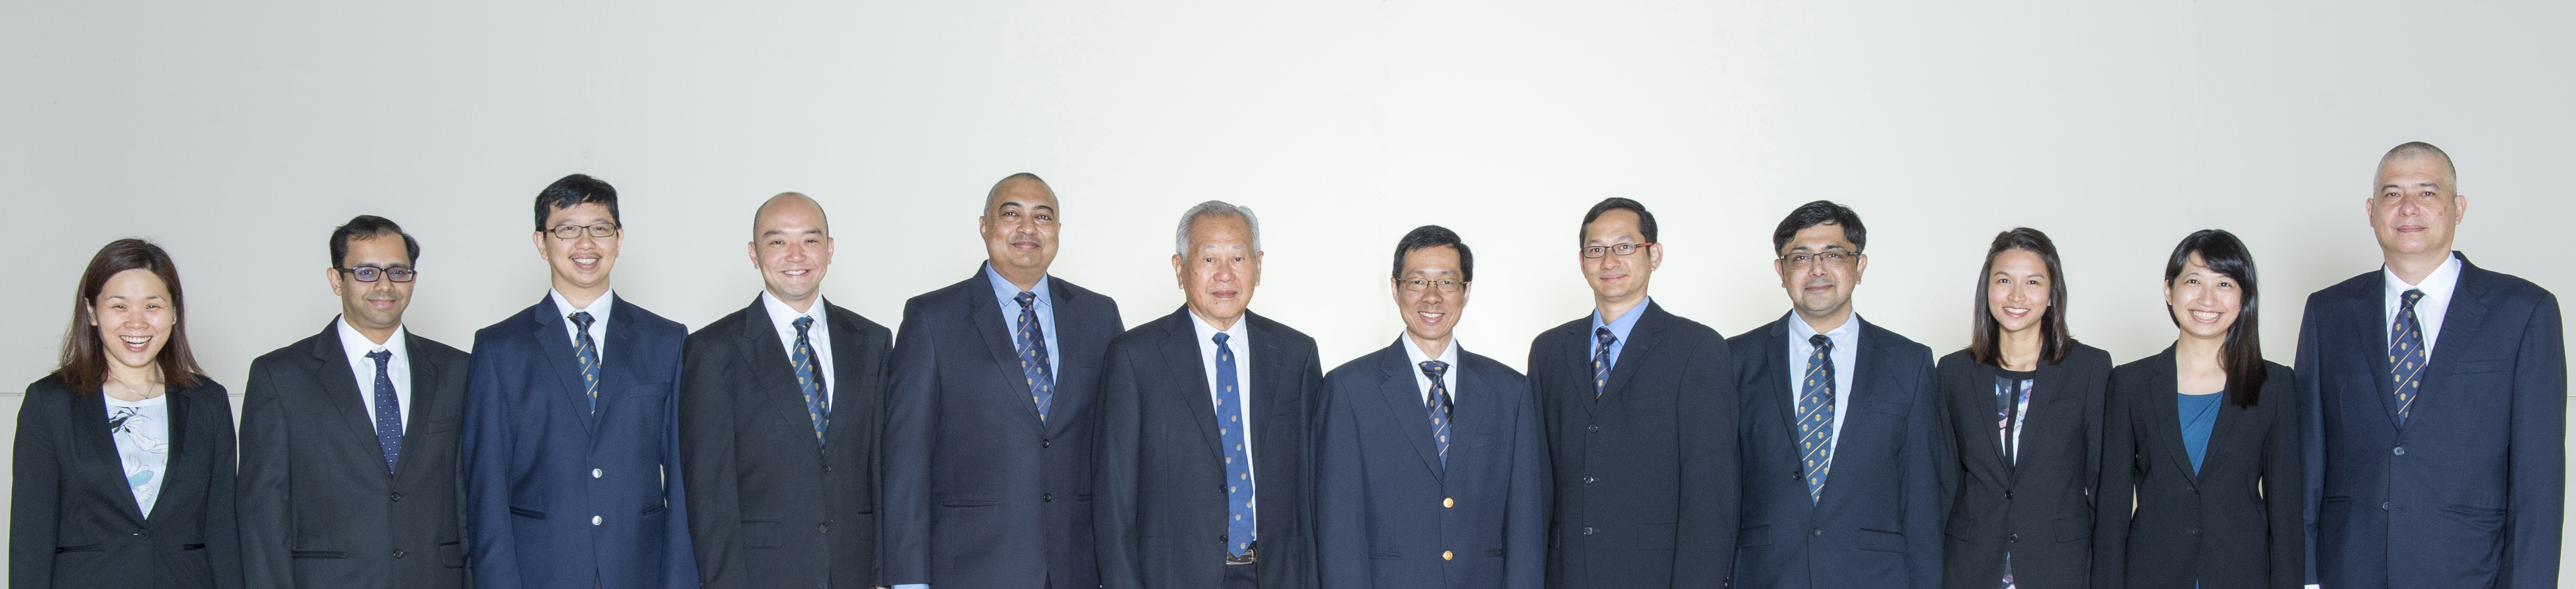 Hand and Reconstructive Micro Surgery Centre (HRM) group photo